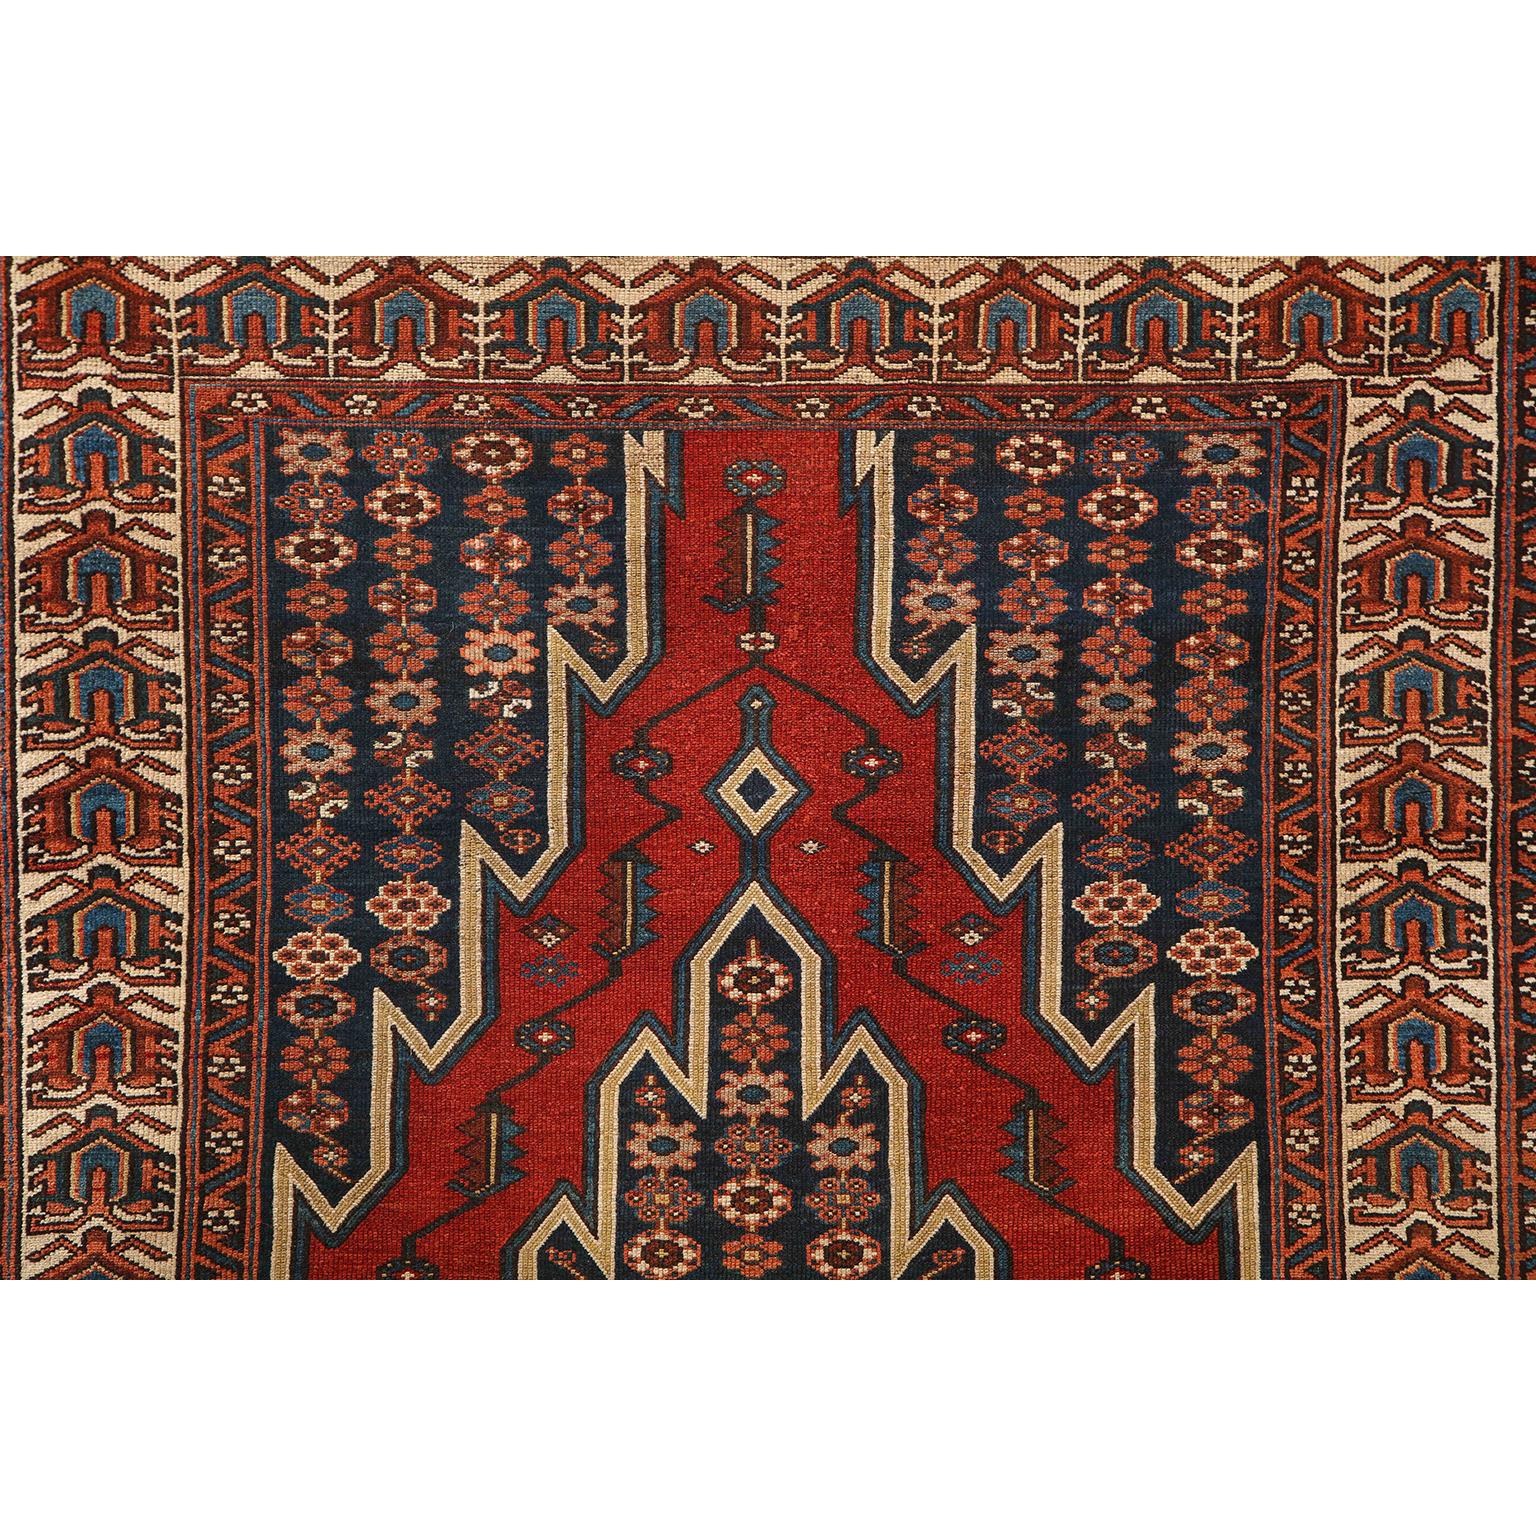 Vegetable Dyed Antique 1920s Wool Persian Mazlaghan Rug, 4' x 6' For Sale